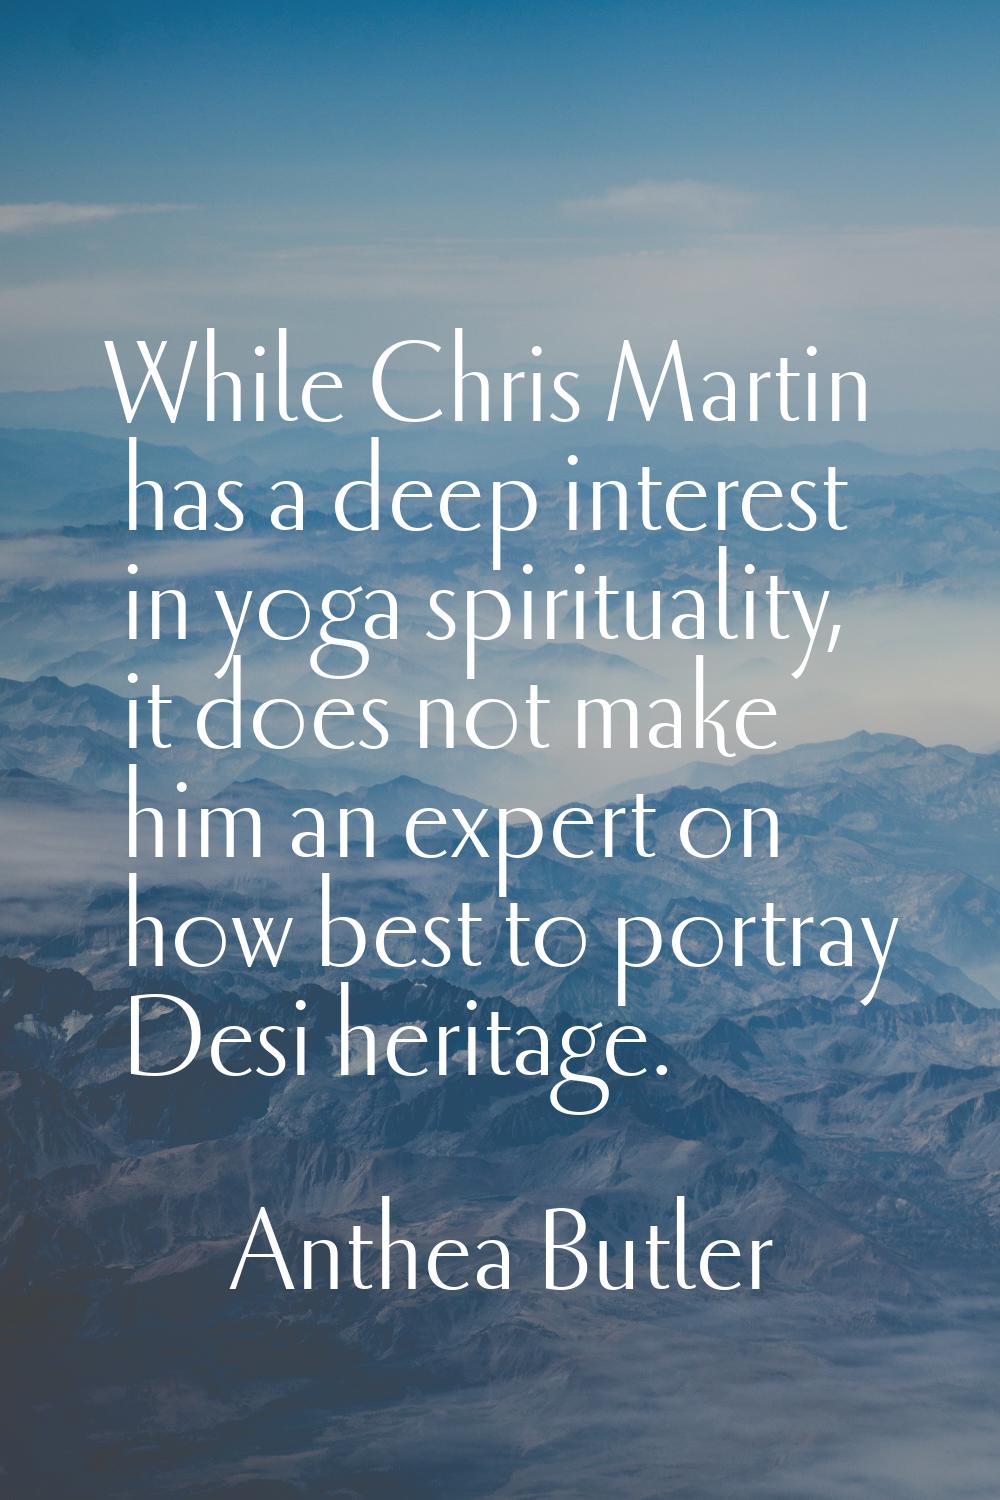 While Chris Martin has a deep interest in yoga spirituality, it does not make him an expert on how 